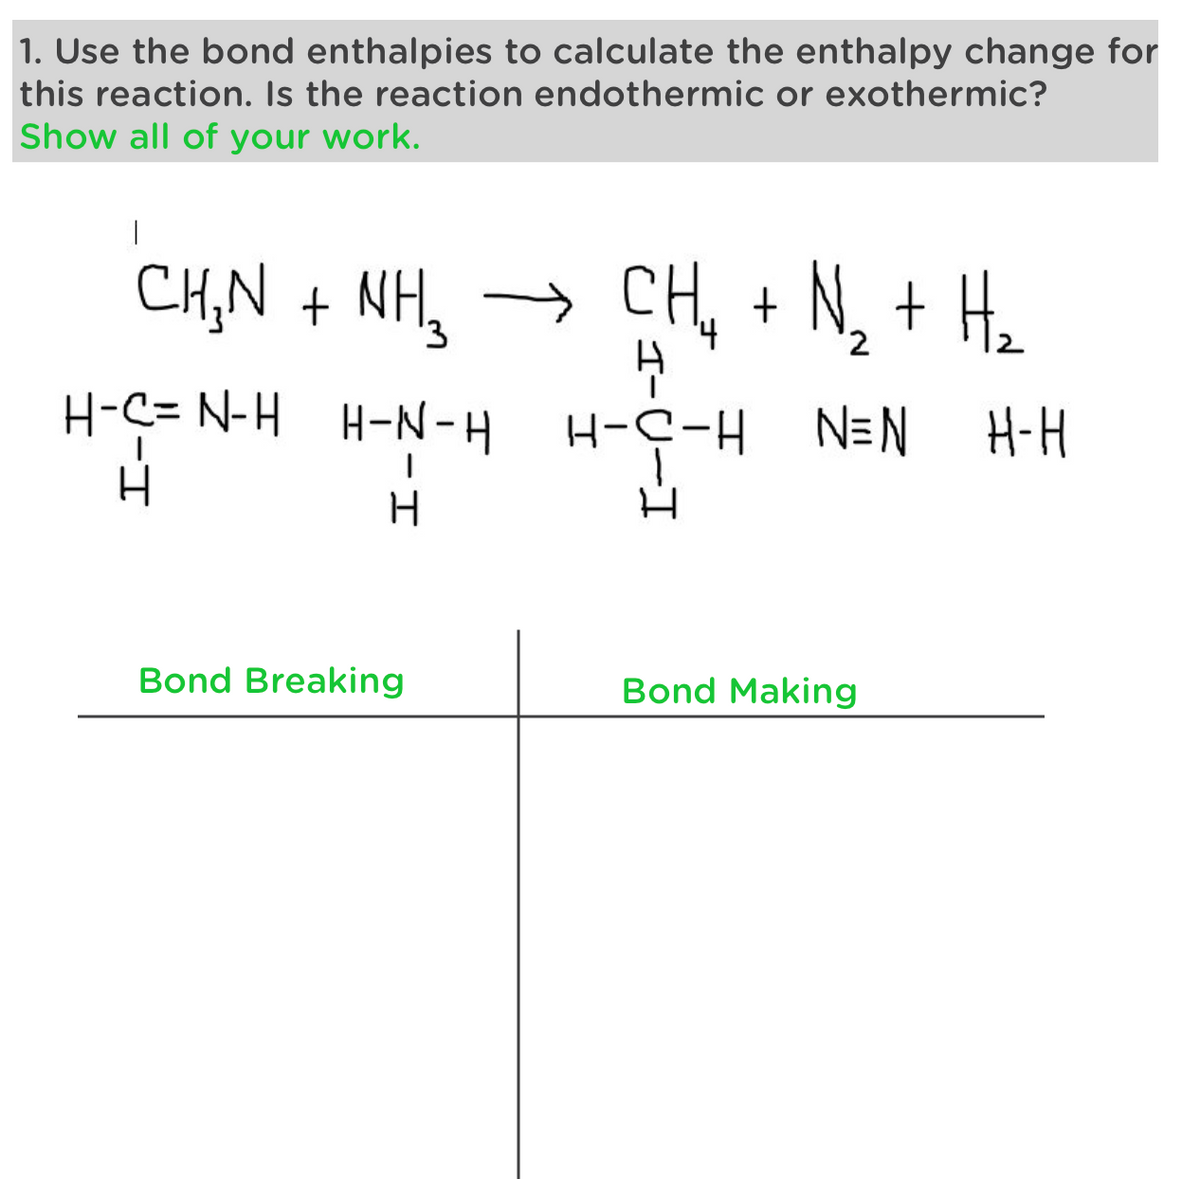 1. Use the bond enthalpies to calculate the enthalpy change for
this reaction. Is the reaction endothermic or exothermic?
Show all of your work.
|
CHỌN + NH,
→ CH₂ + N₂ + H₂
н
H-N-H H-C-H N=N
H-C= N-H
H
H
H
Bond Breaking
Bond Making
H-H